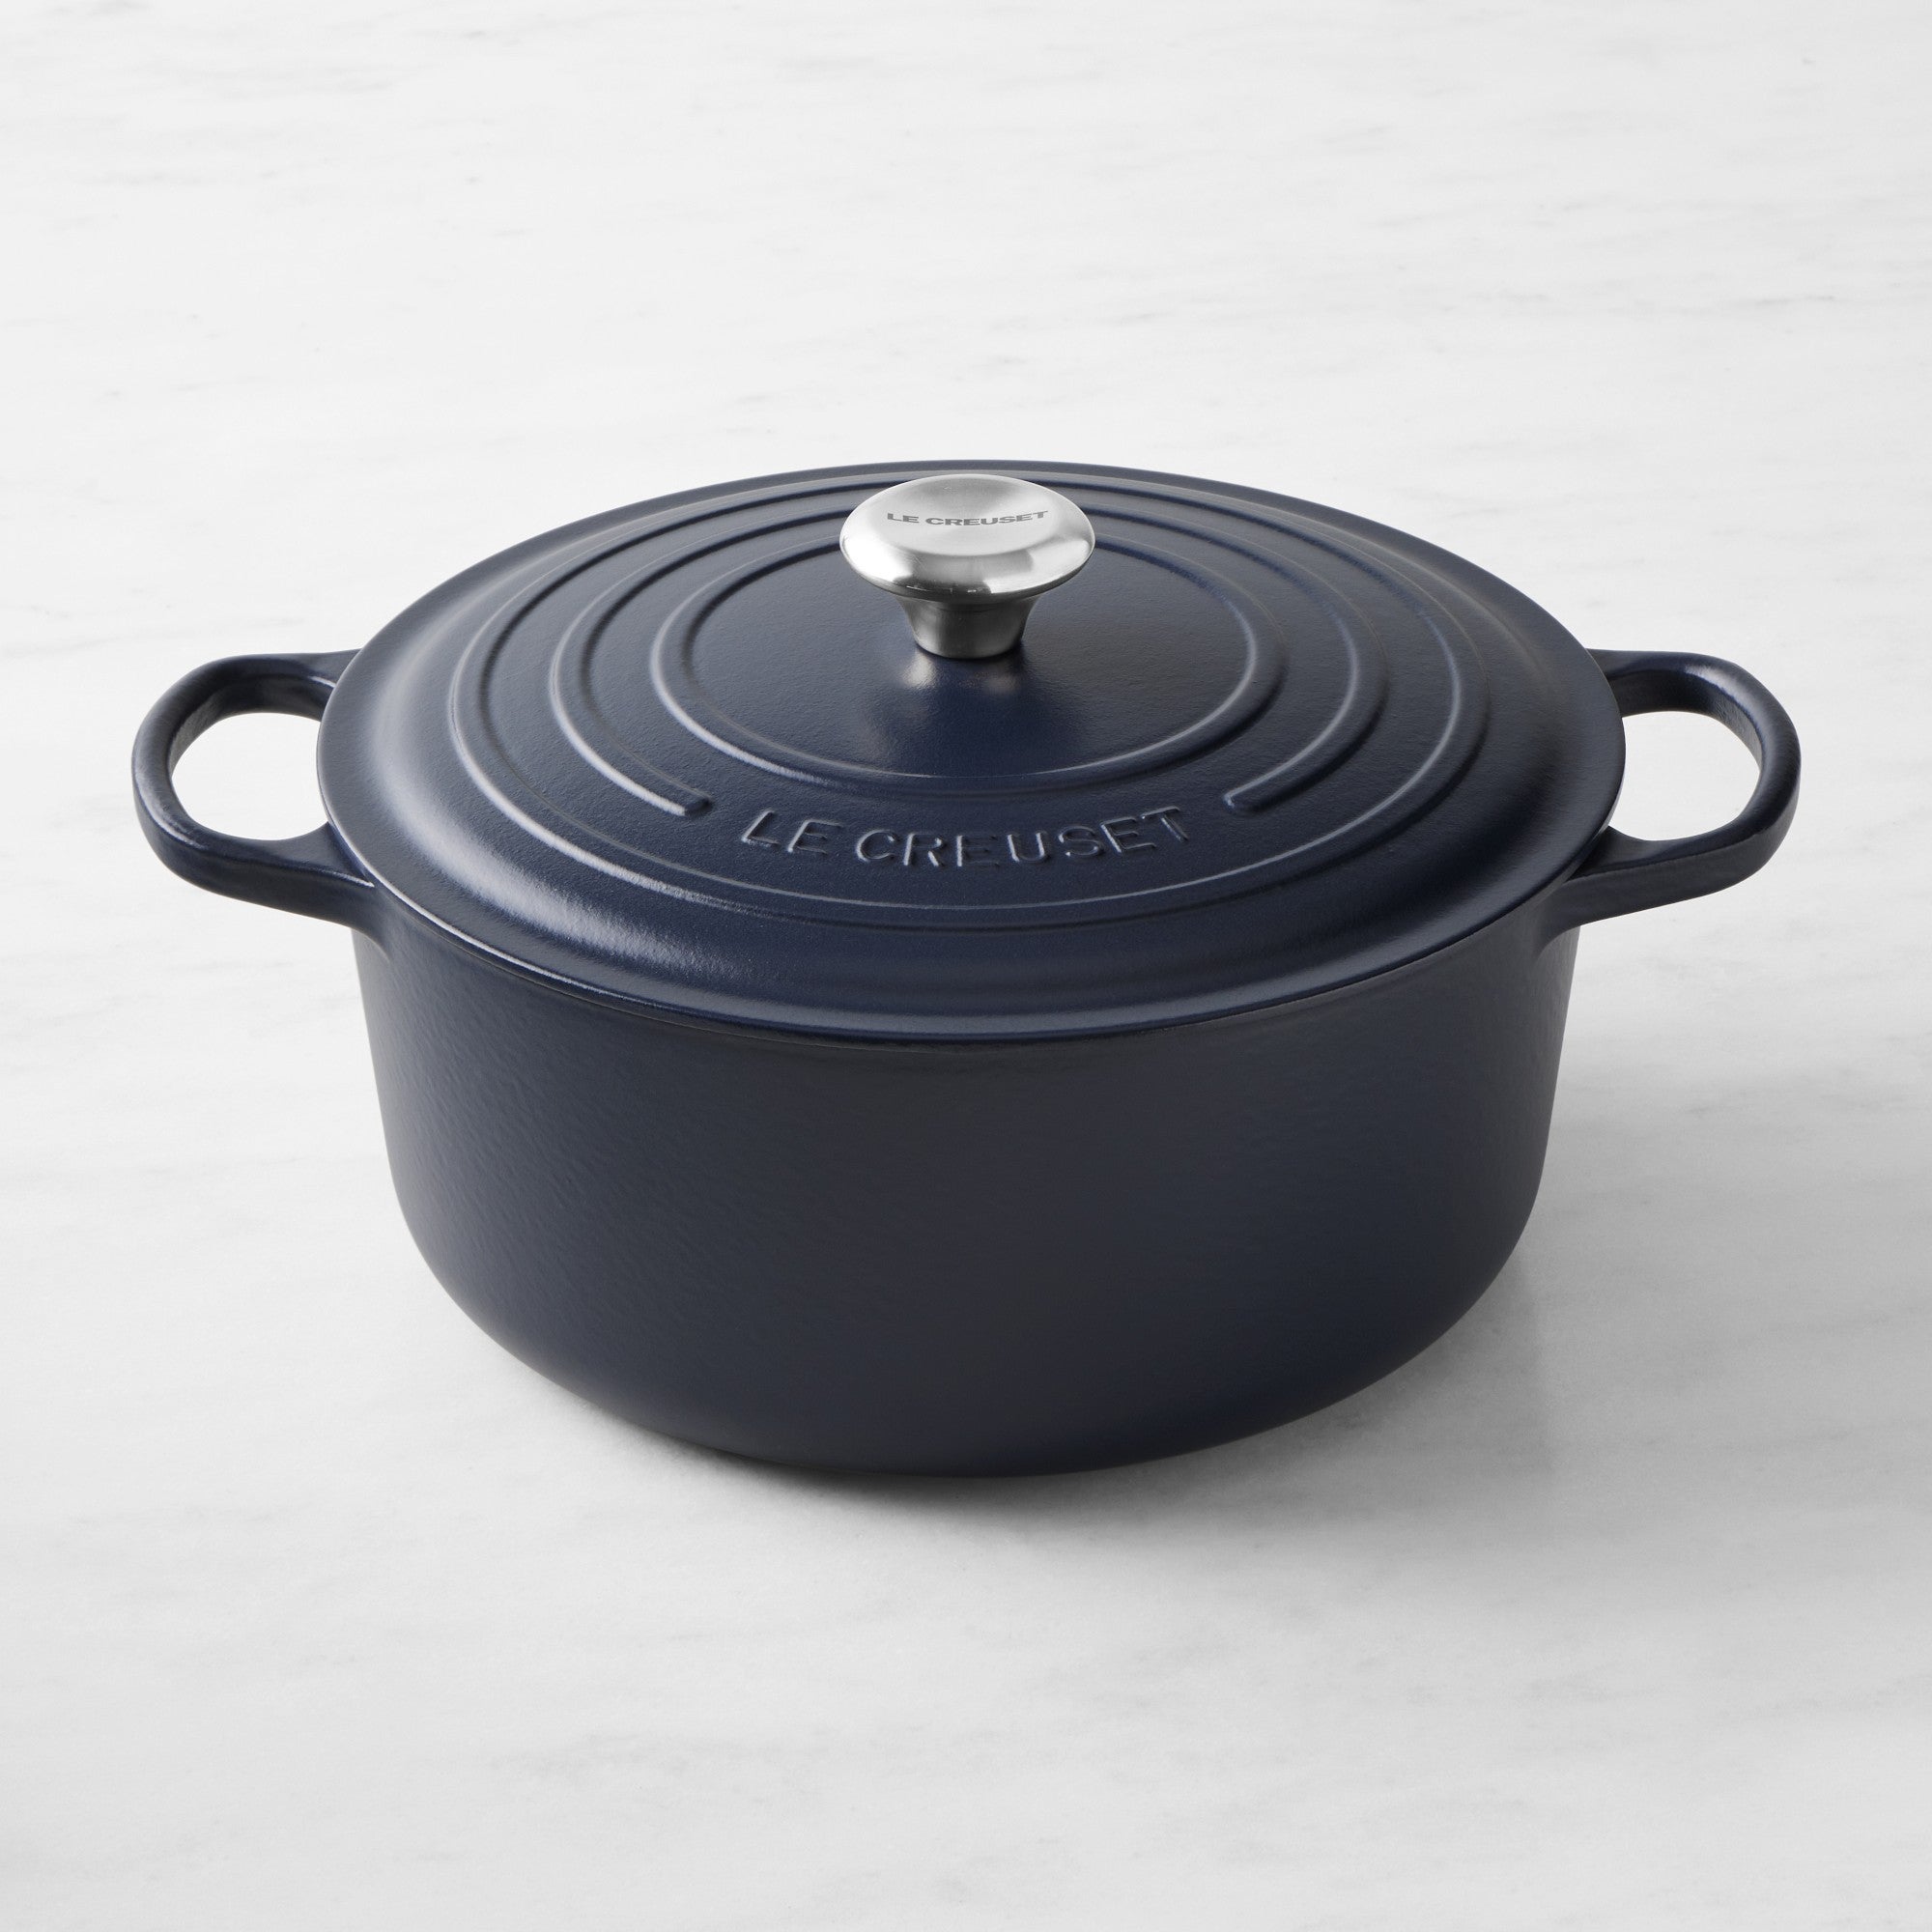 If You Like Farrow & Ball’s Hague Blue, You’ll Love Le Creuset’s New Cookware Color